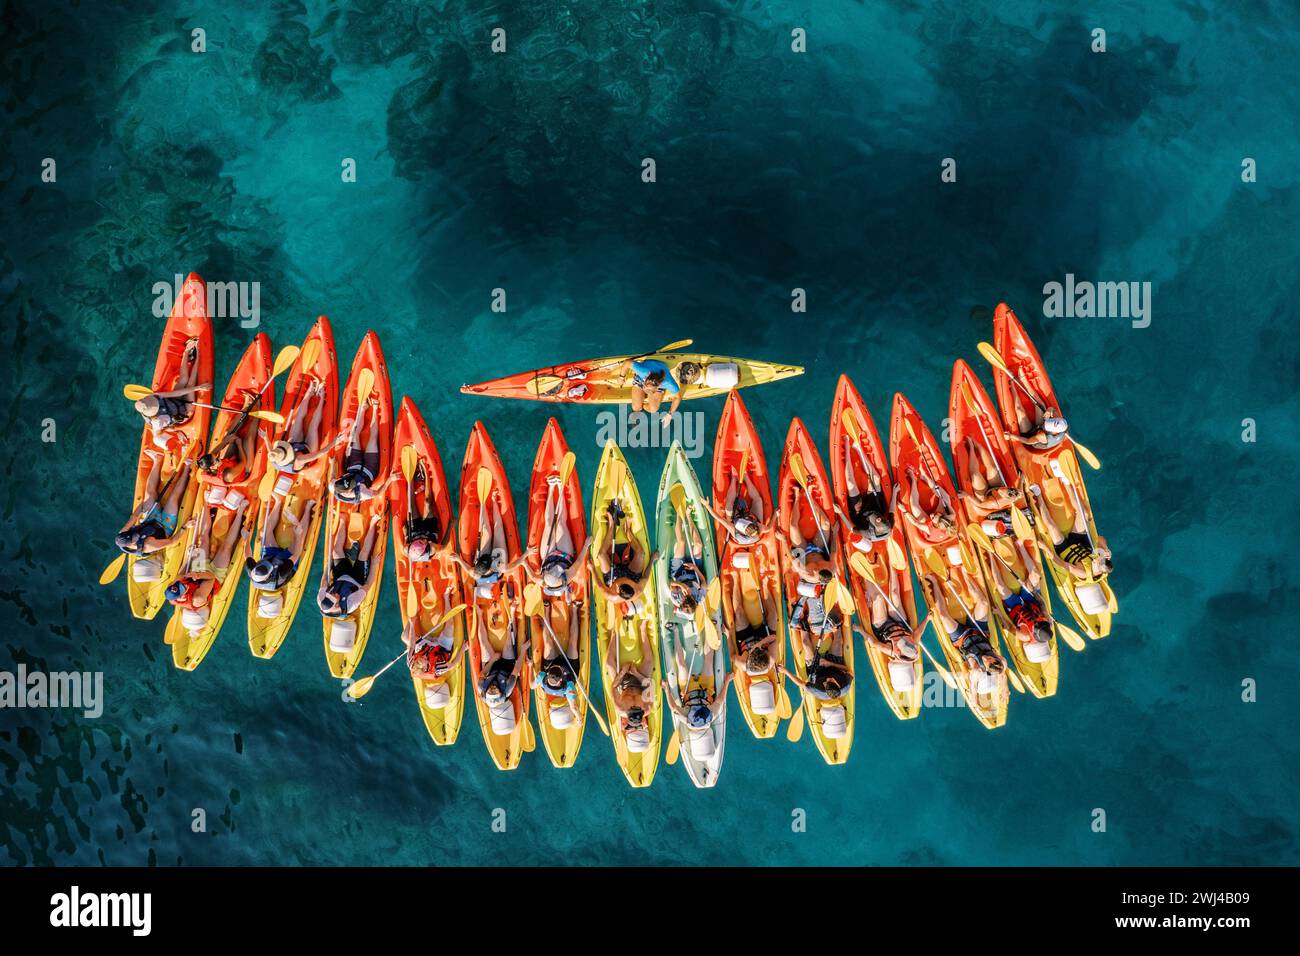 Captain of the kayaking team stands perpendicular in the boat in front of a row of kayaks. Top view Stock Photo